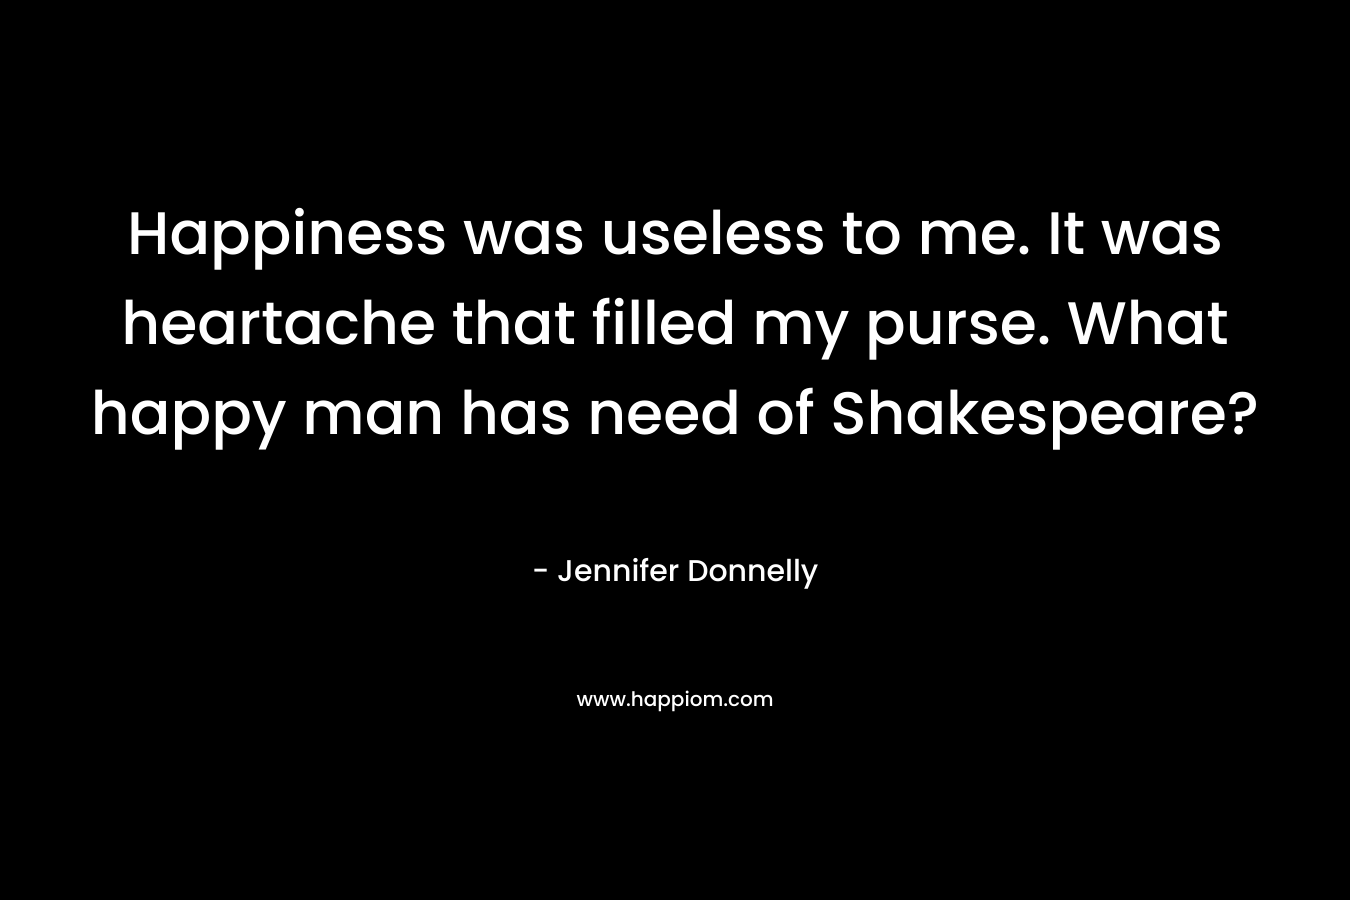 Happiness was useless to me. It was heartache that filled my purse. What happy man has need of Shakespeare? – Jennifer Donnelly